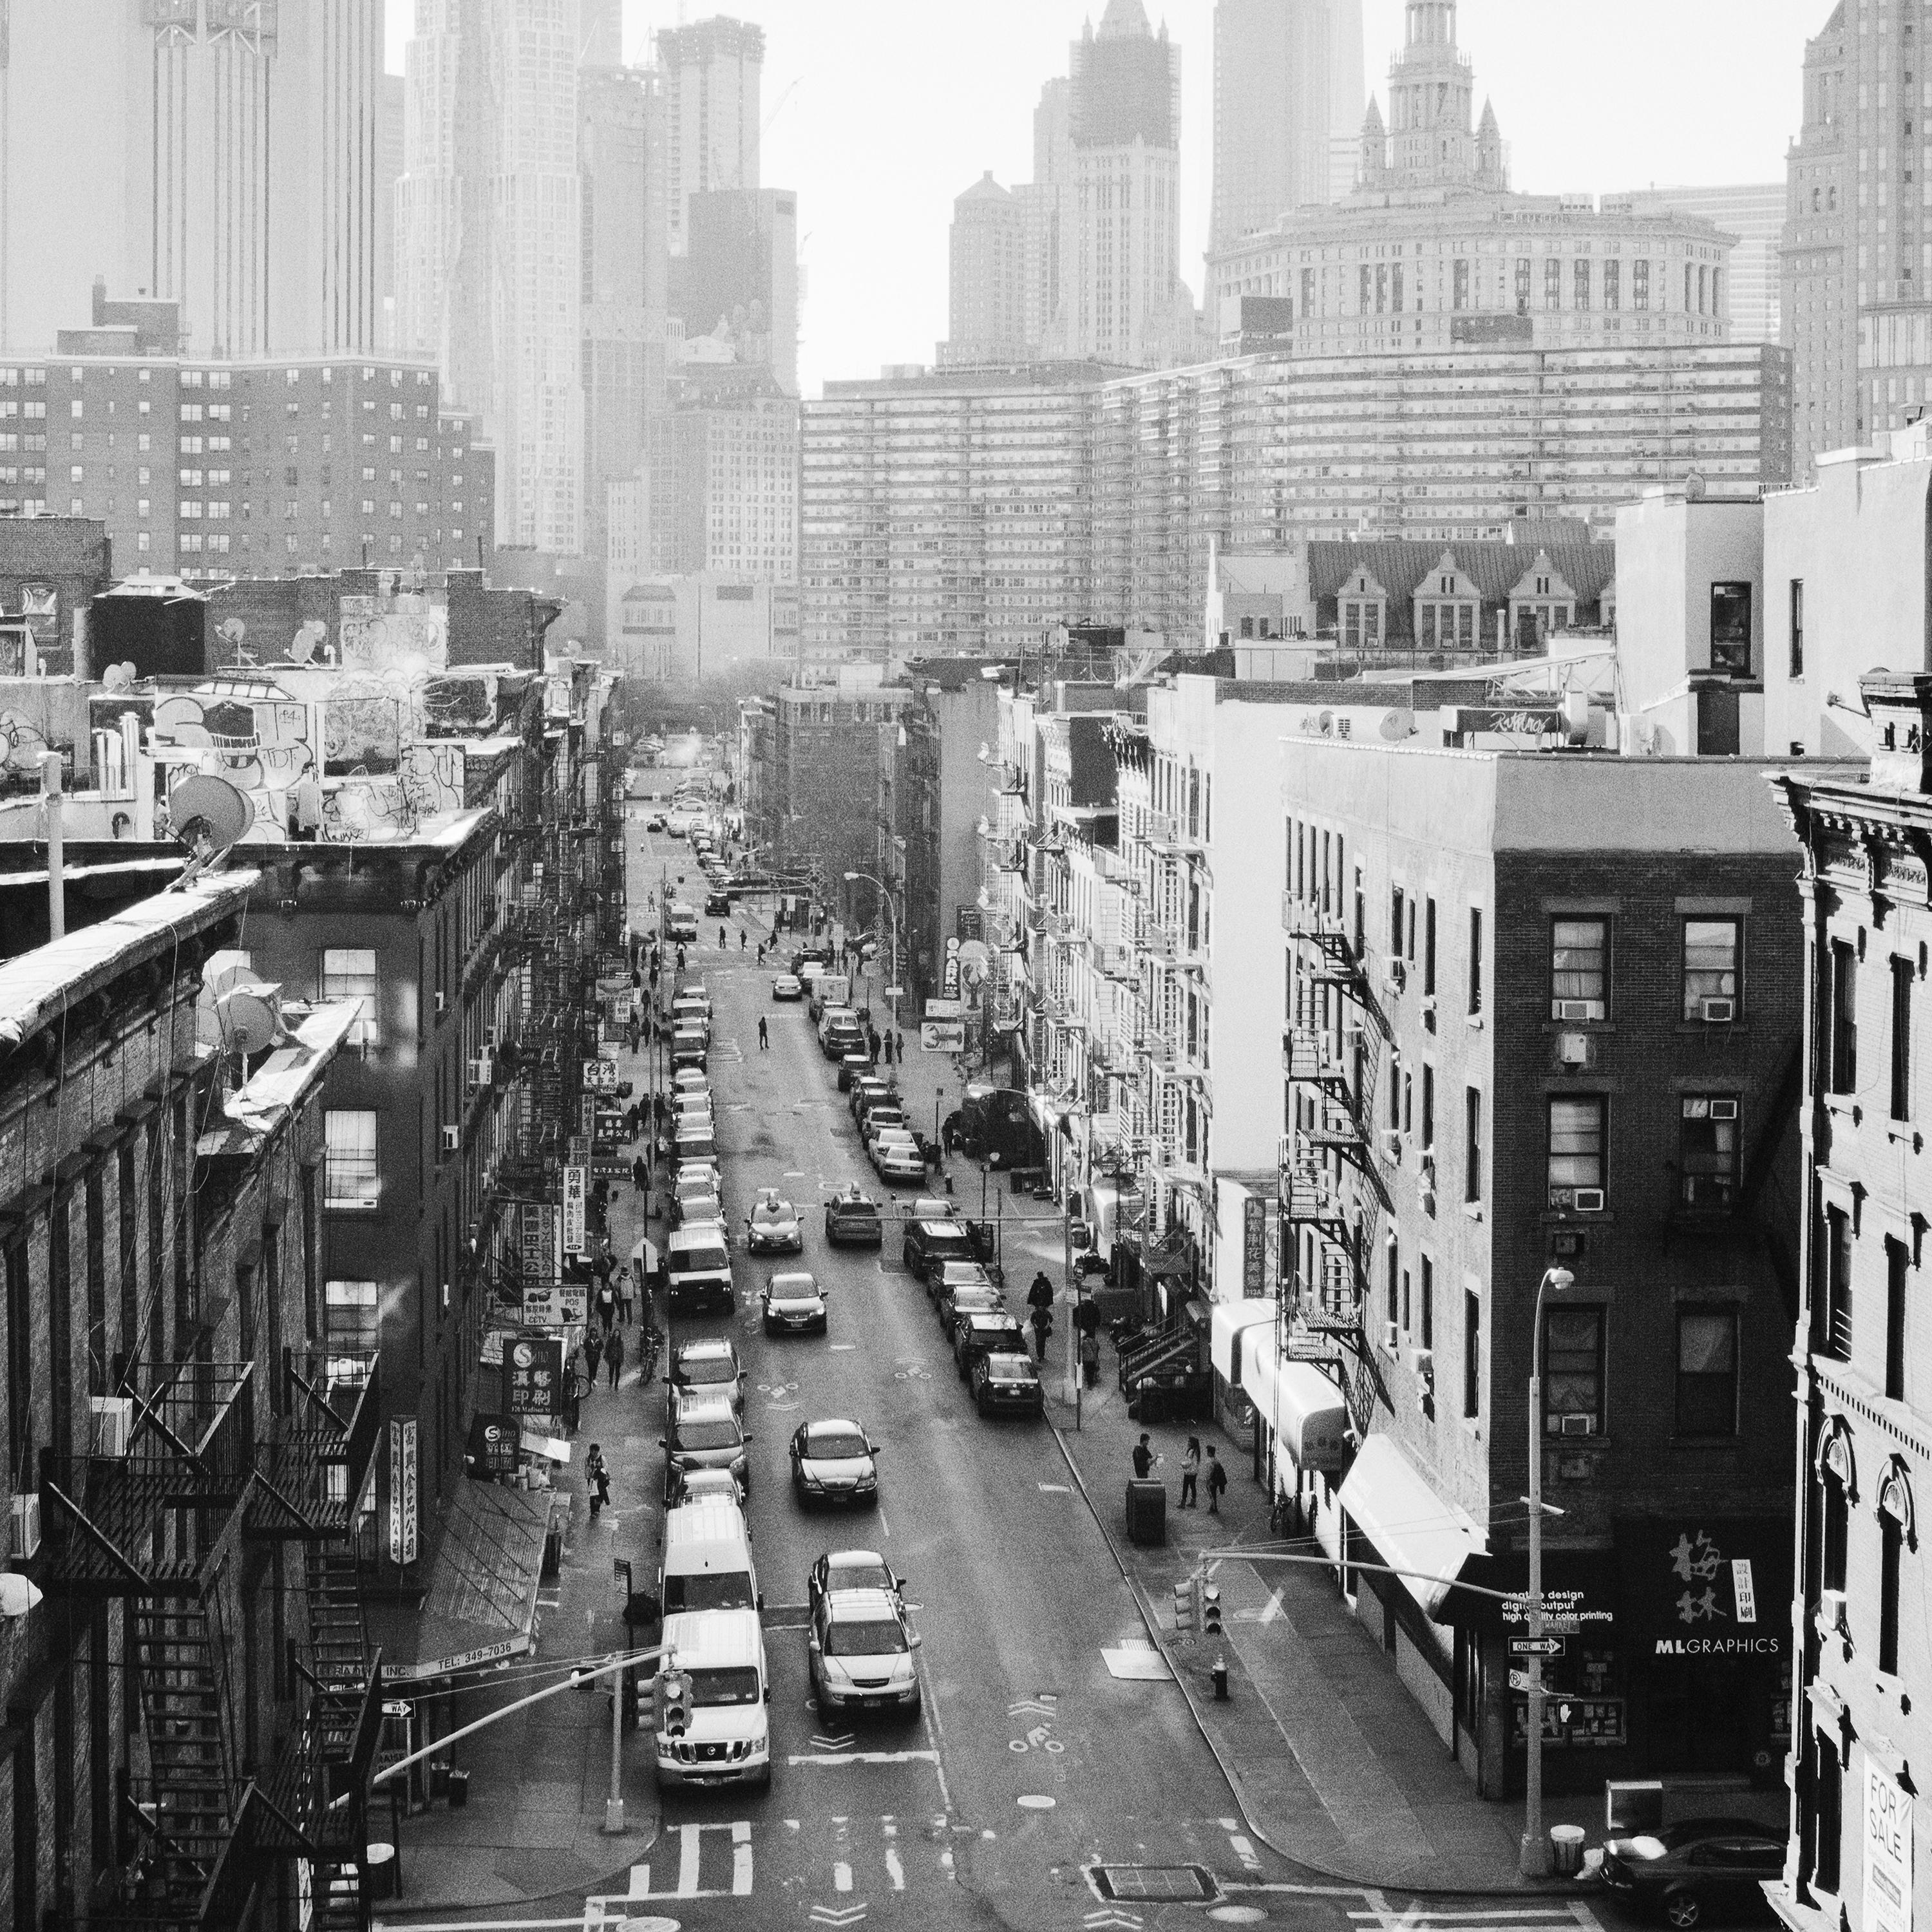 Black and white fine art cityscape - landscape photography. View of chinatown from manhattan bridge, New York City, USA.  Archival pigment ink print as part of a limited edition of 9. All Gerald Berghammer prints are made to order in limited